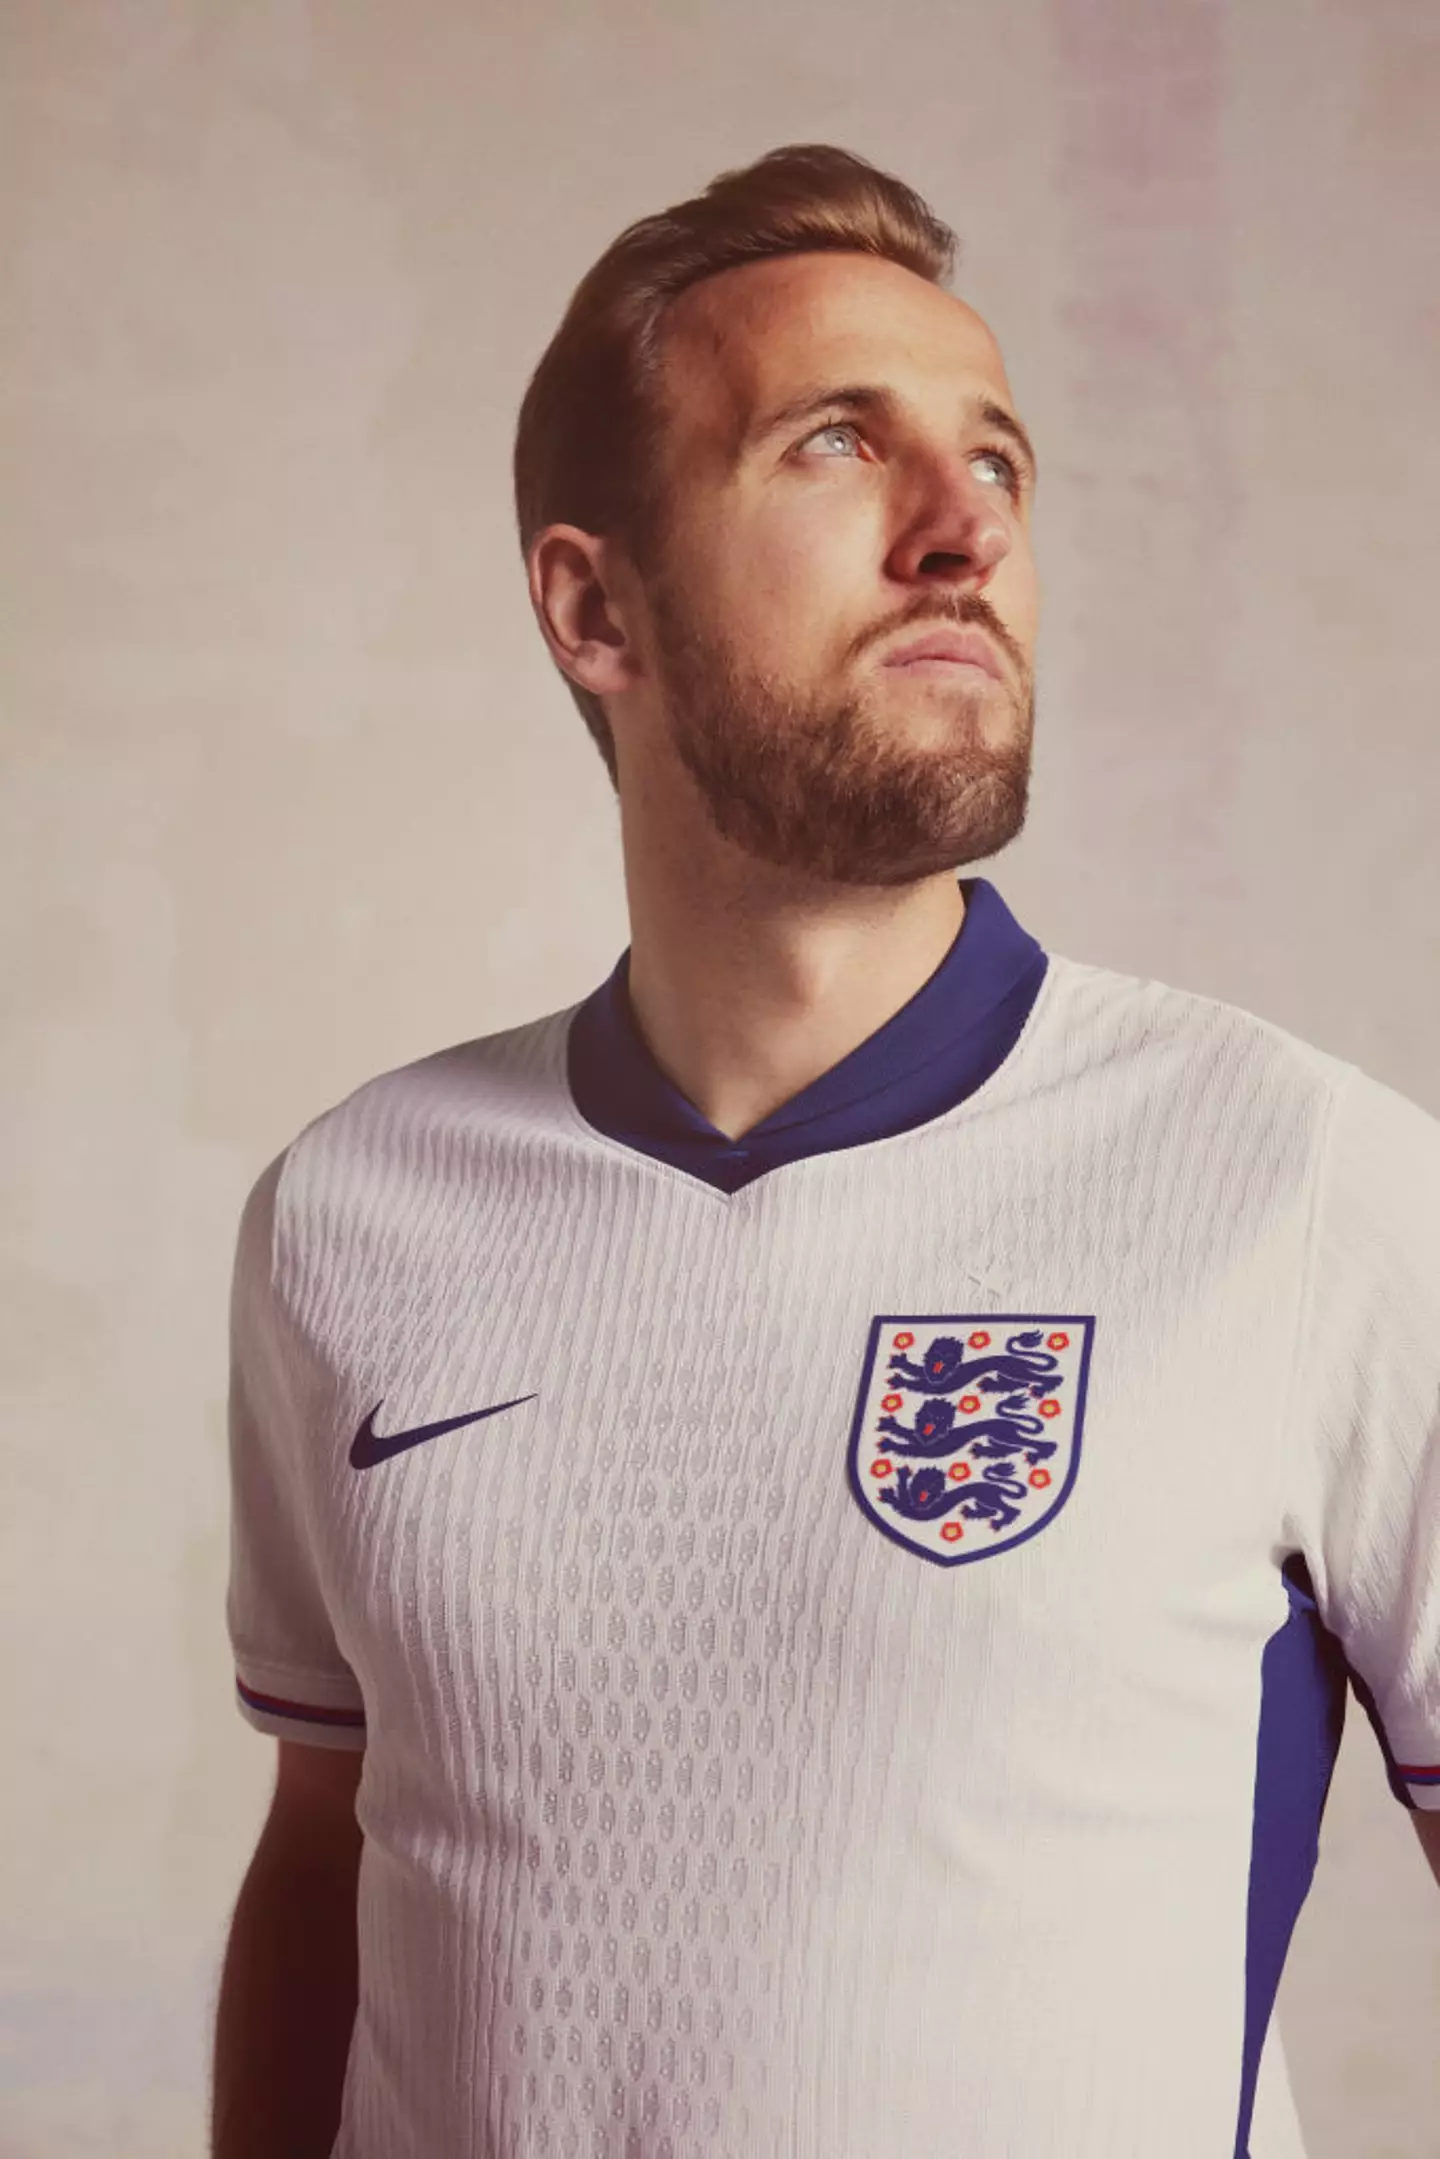 England will debut their new kit against Brazil on Saturday (Image: Getty)